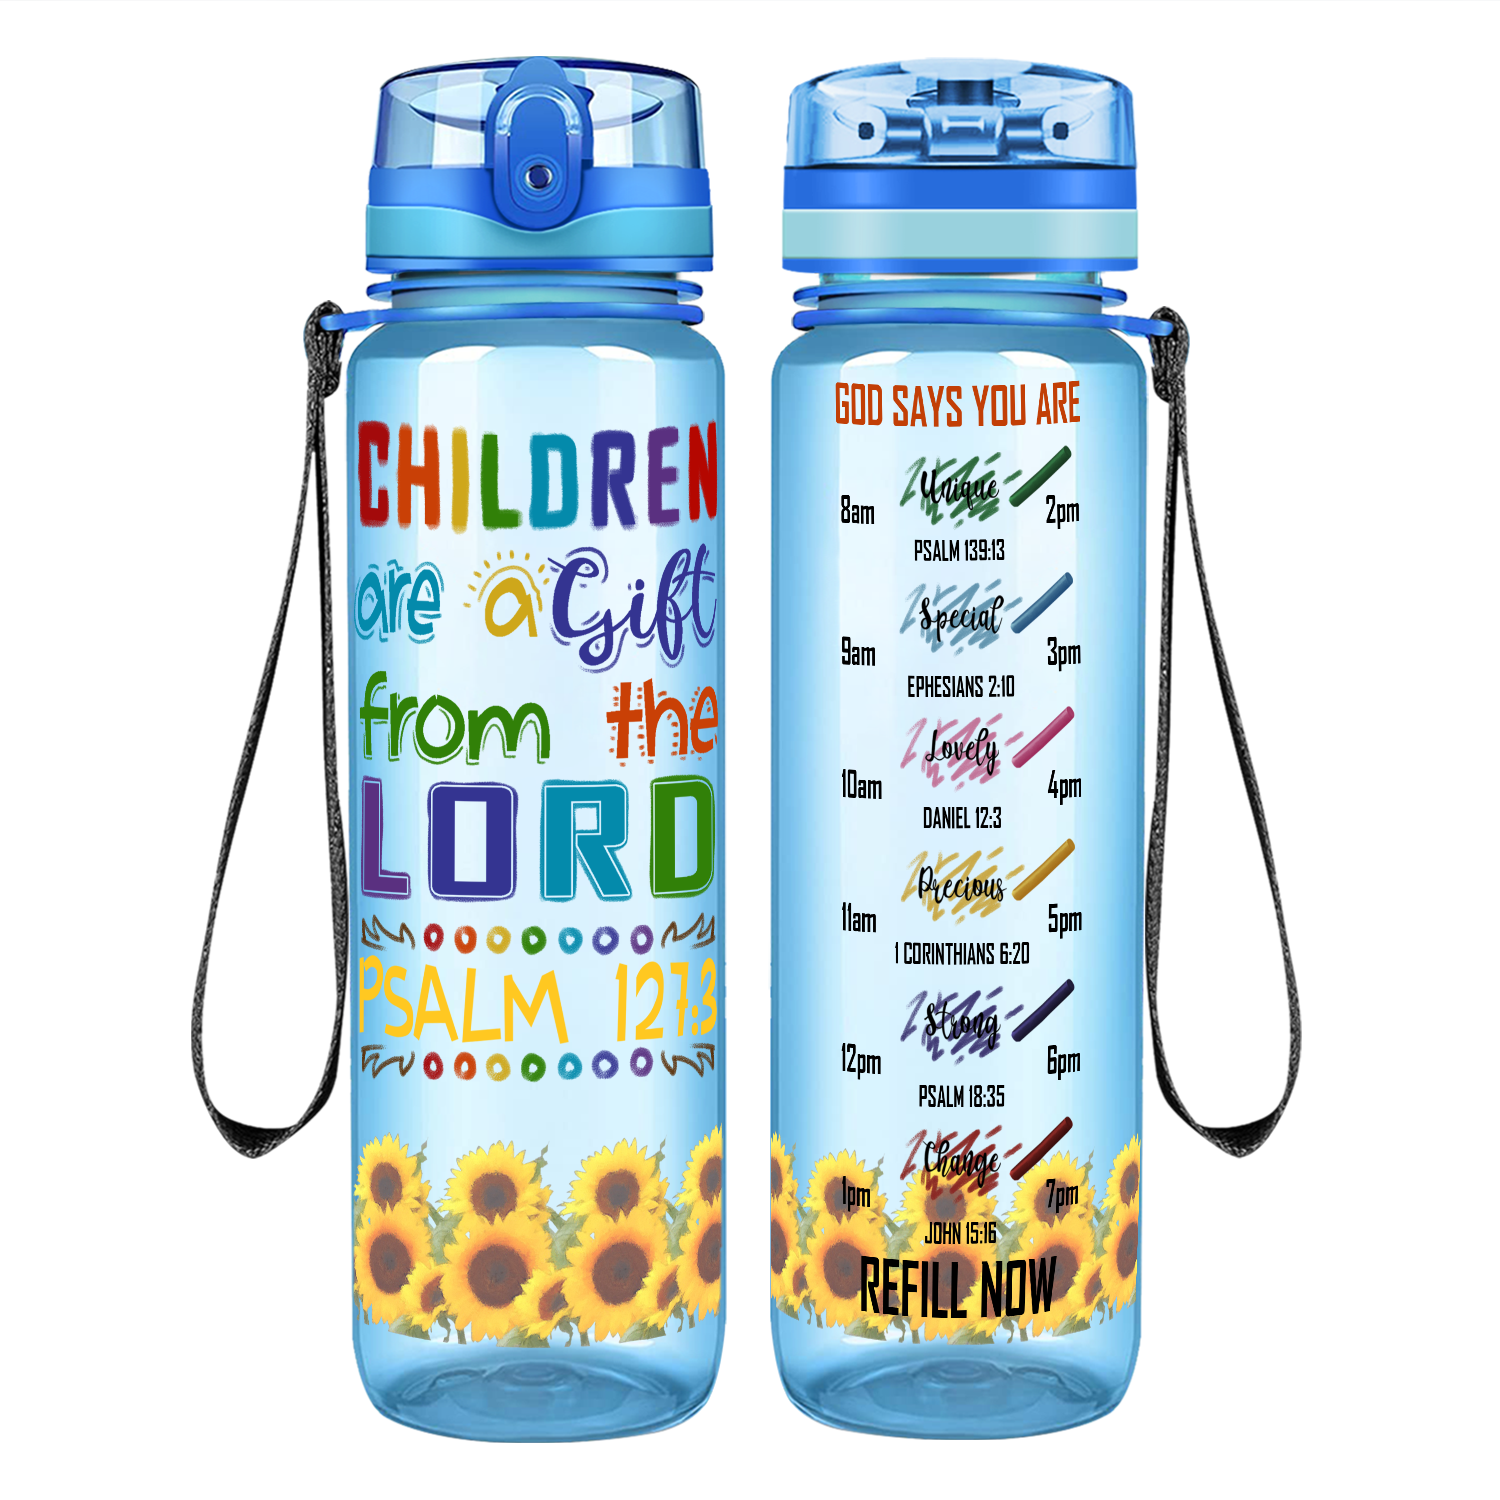 Children are a Gift from the Lord on 32 oz Motivational Tracking Water Bottle